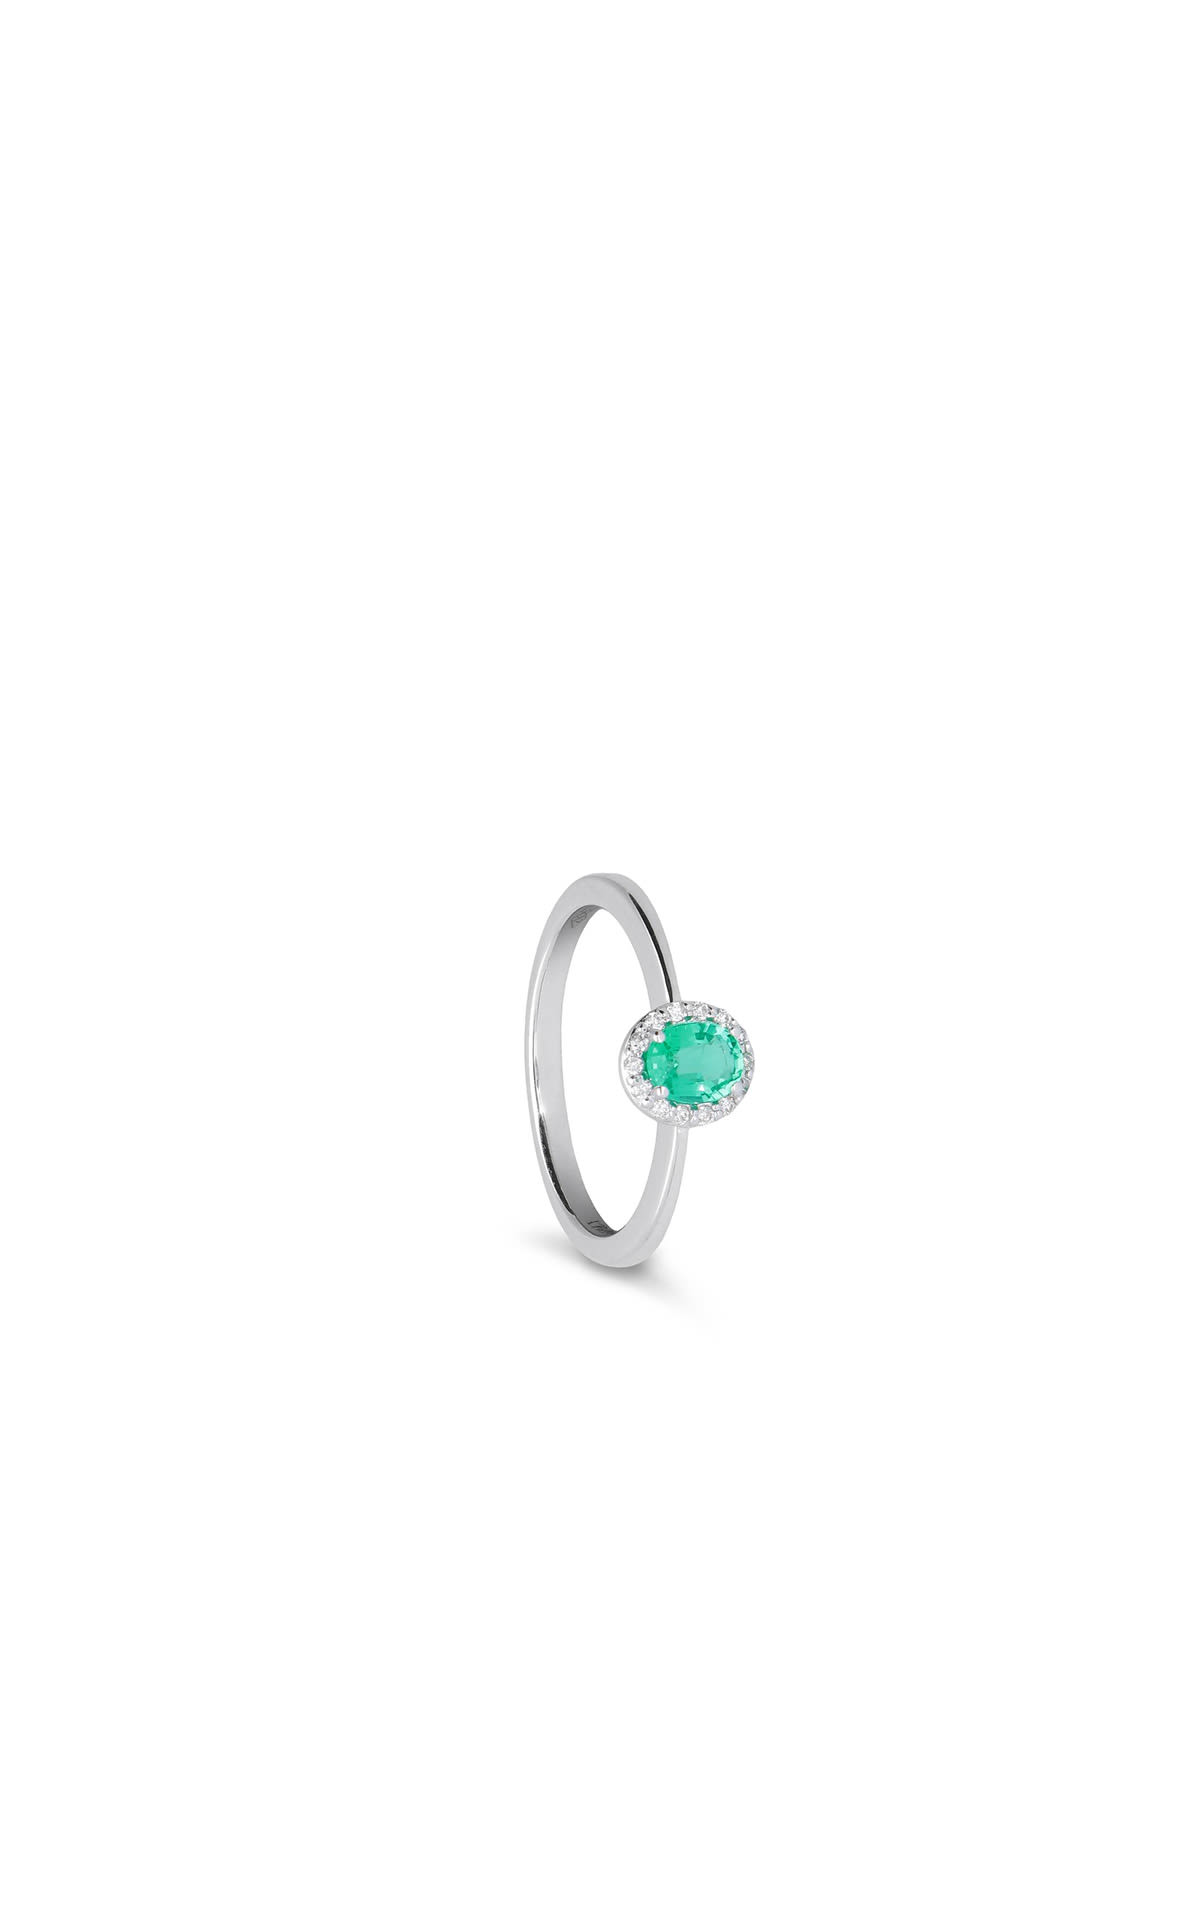 Luxury Zone ring in white gold with diamonds and emerald